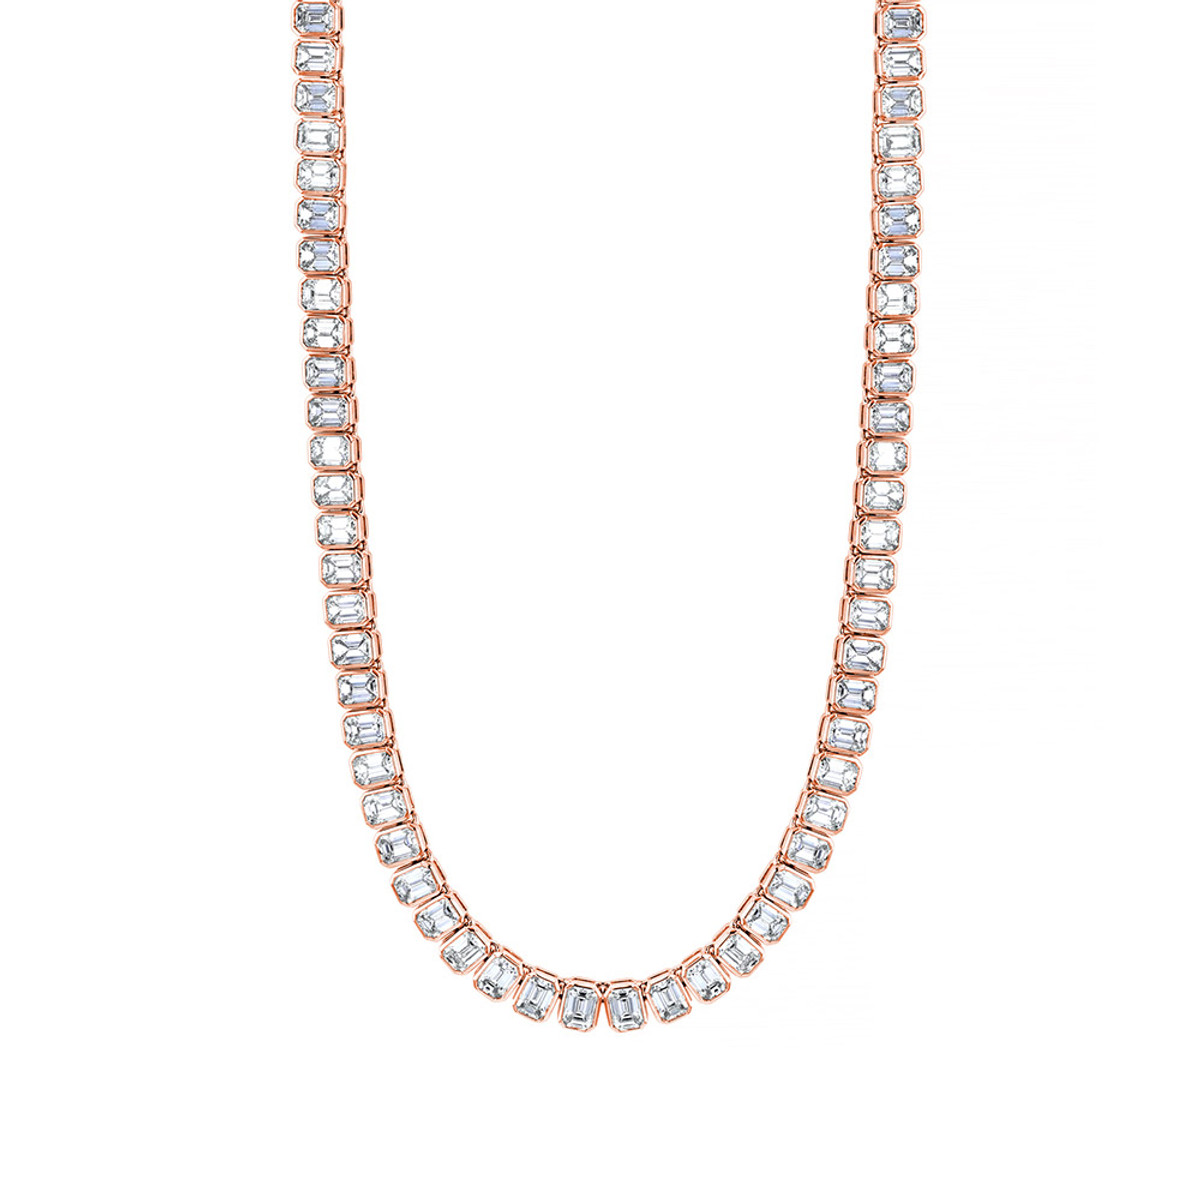 Hyde Park Collection 18K Rose Gold Diamond Line Necklace-59200 Product Image